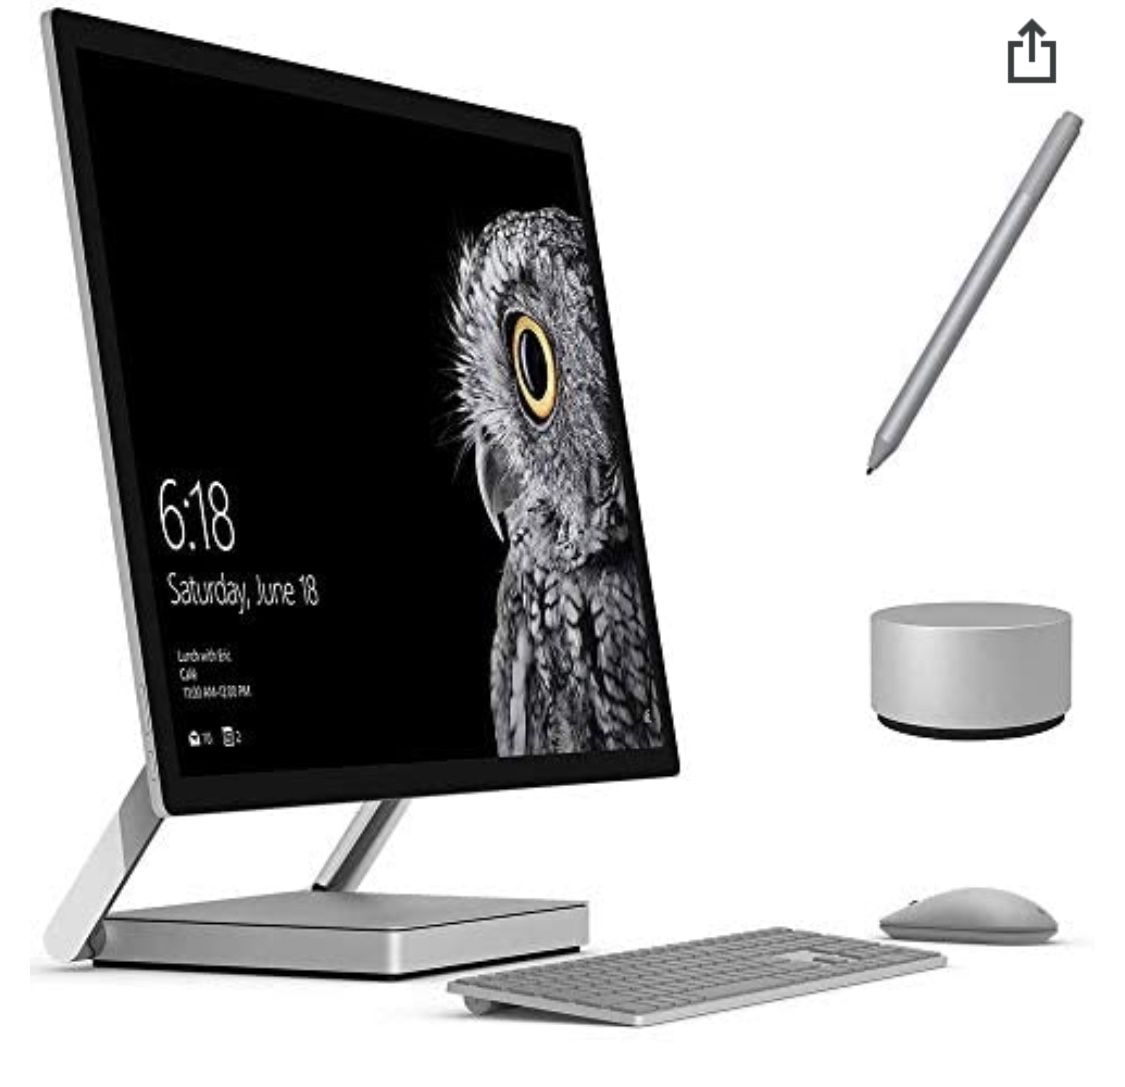 Microsoft Surface Studio All-in-one 28" 4500x3000 i5 8GB RAM 1TB HDD AIO PC GTX 965M, Pen, Keyboard, Mouse, Win 10 Pro 